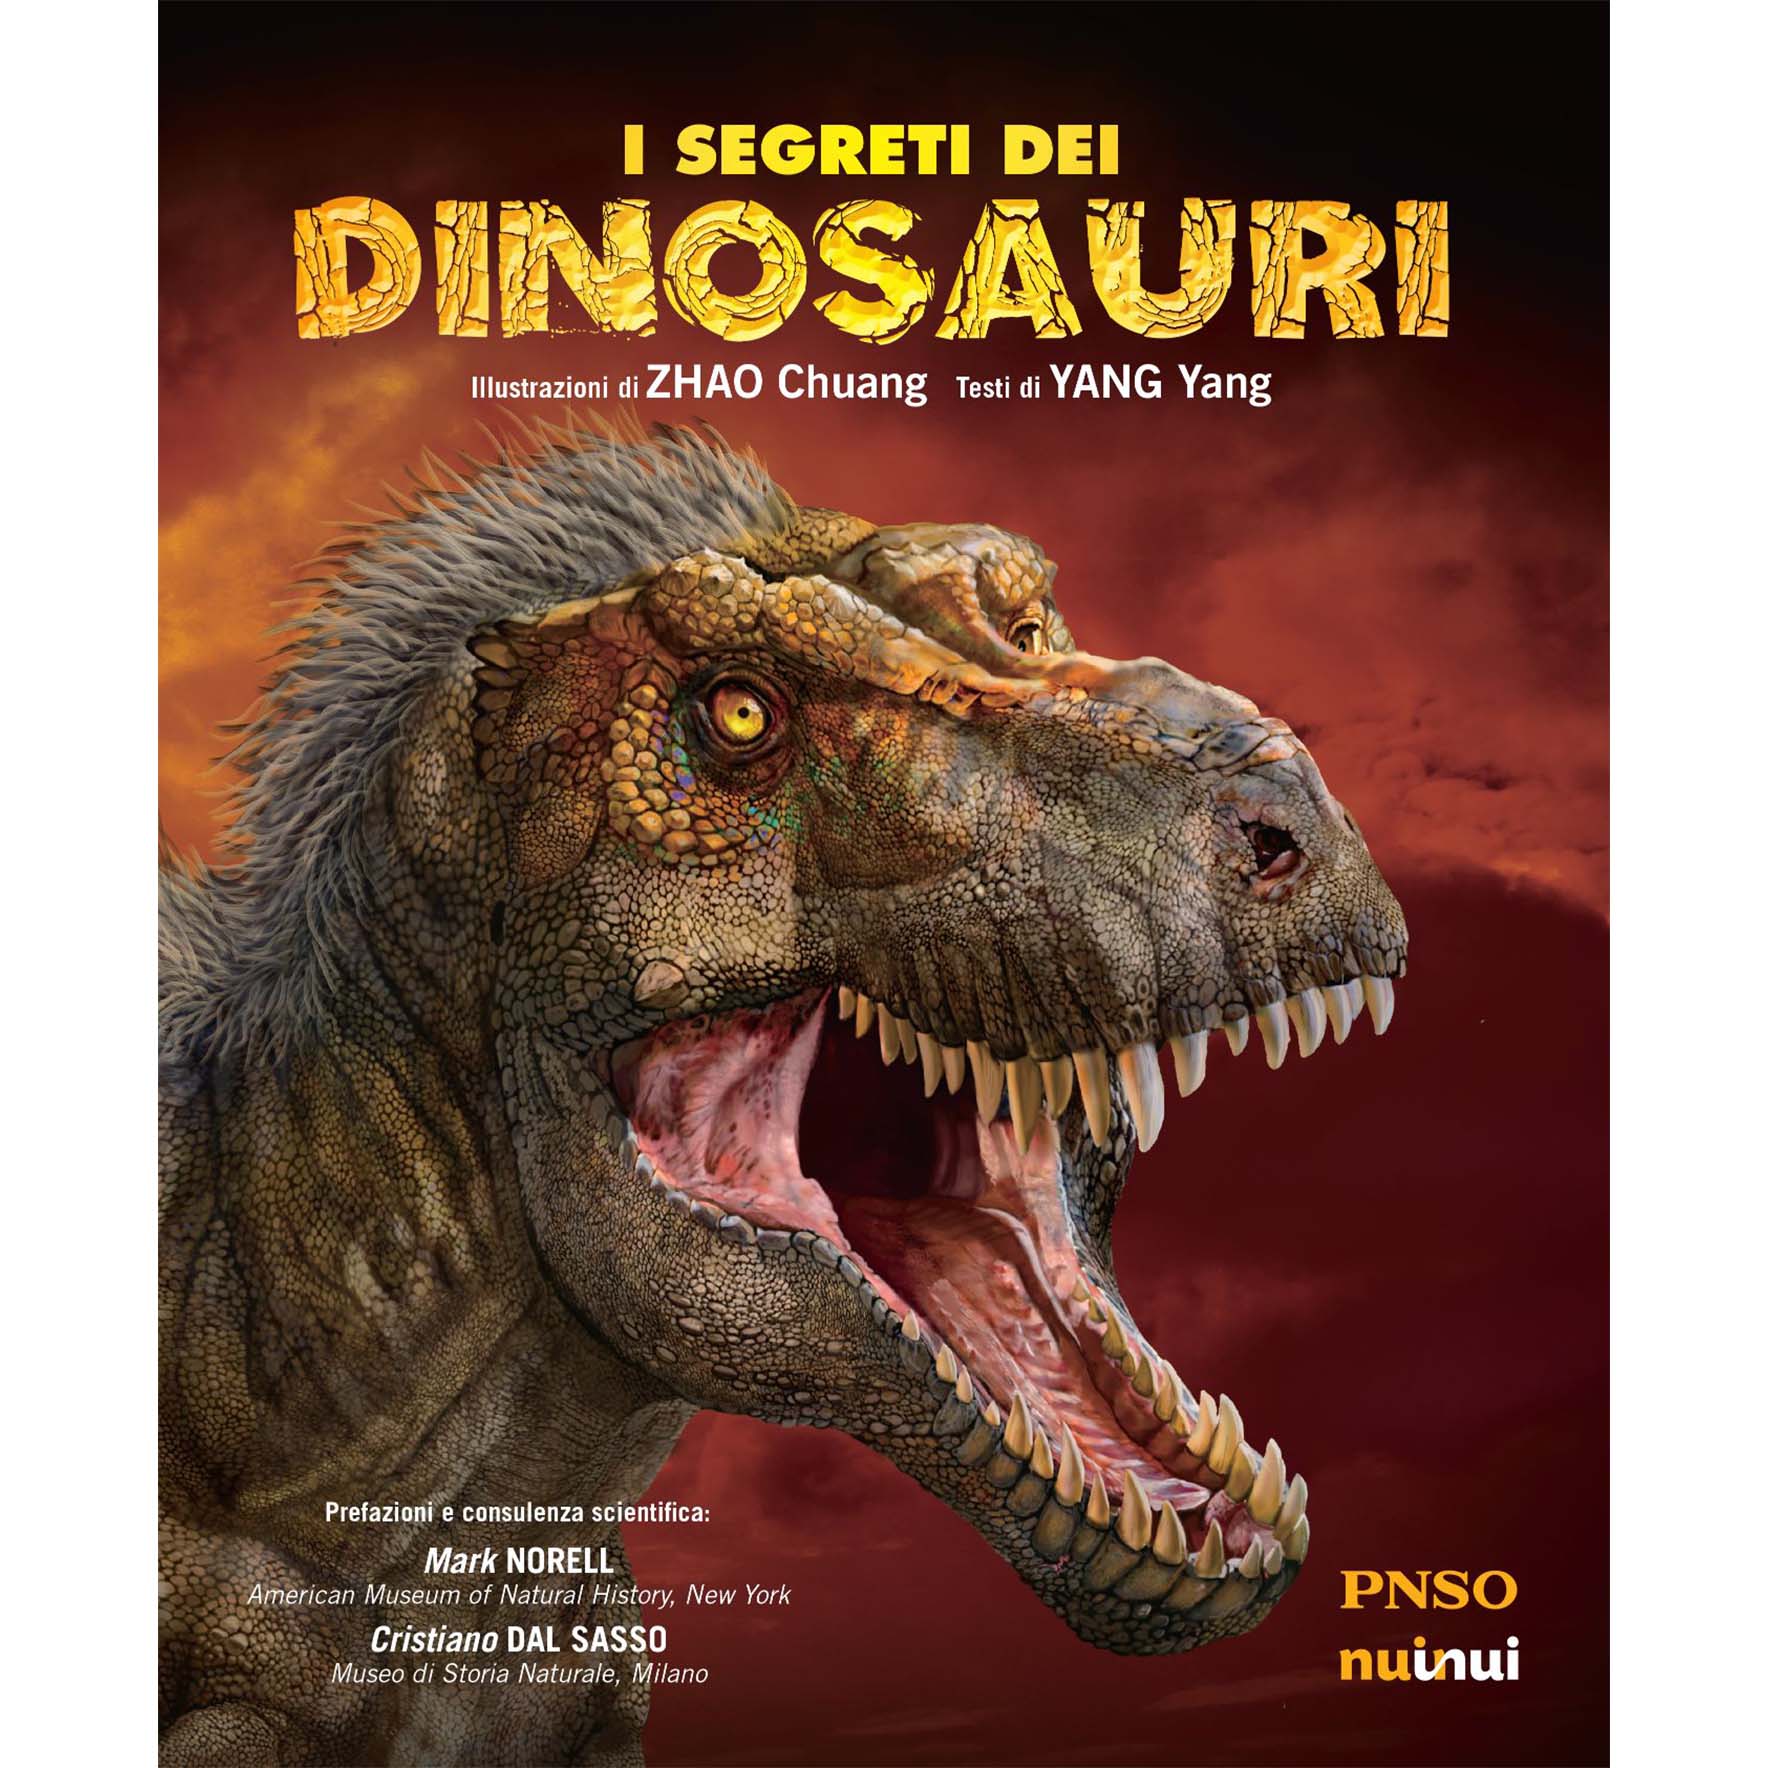 The secrets of the dinosaurs